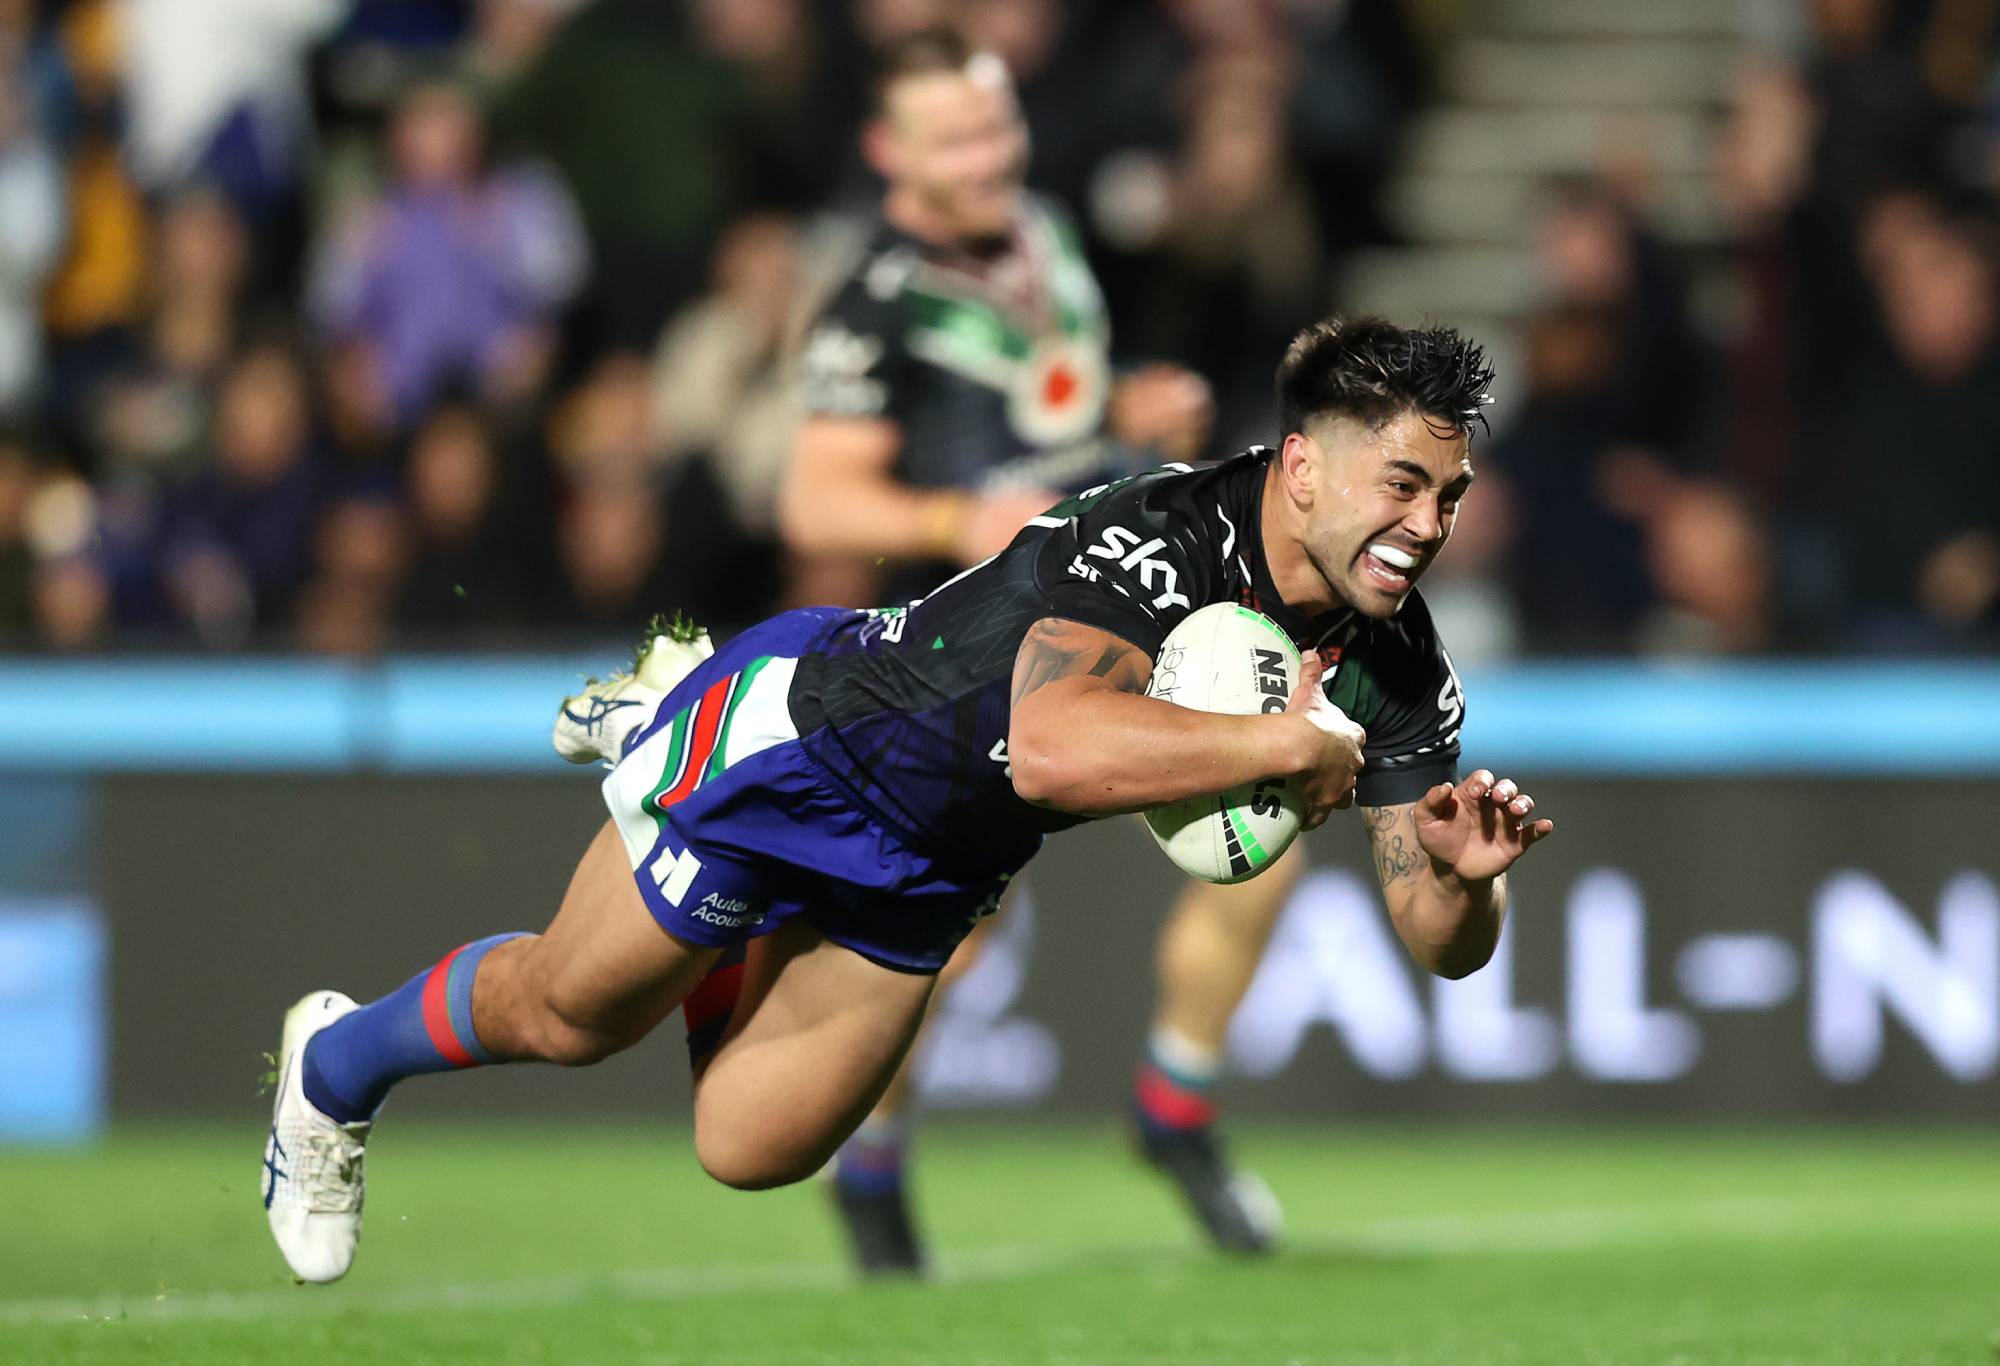 AUCKLAND, NEW ZEALAND - AUGUST 12: Shaun Johnson of the Warriors pauses to take a shot during the Round 22 NRL game between the New Zealand Warriors and the Canterbury Bulldogs at Mt Smart Stadium on August 12, 2022 in Auckland, New Zealand try to achieve .  (Photo by Phil Walter/Getty Images)